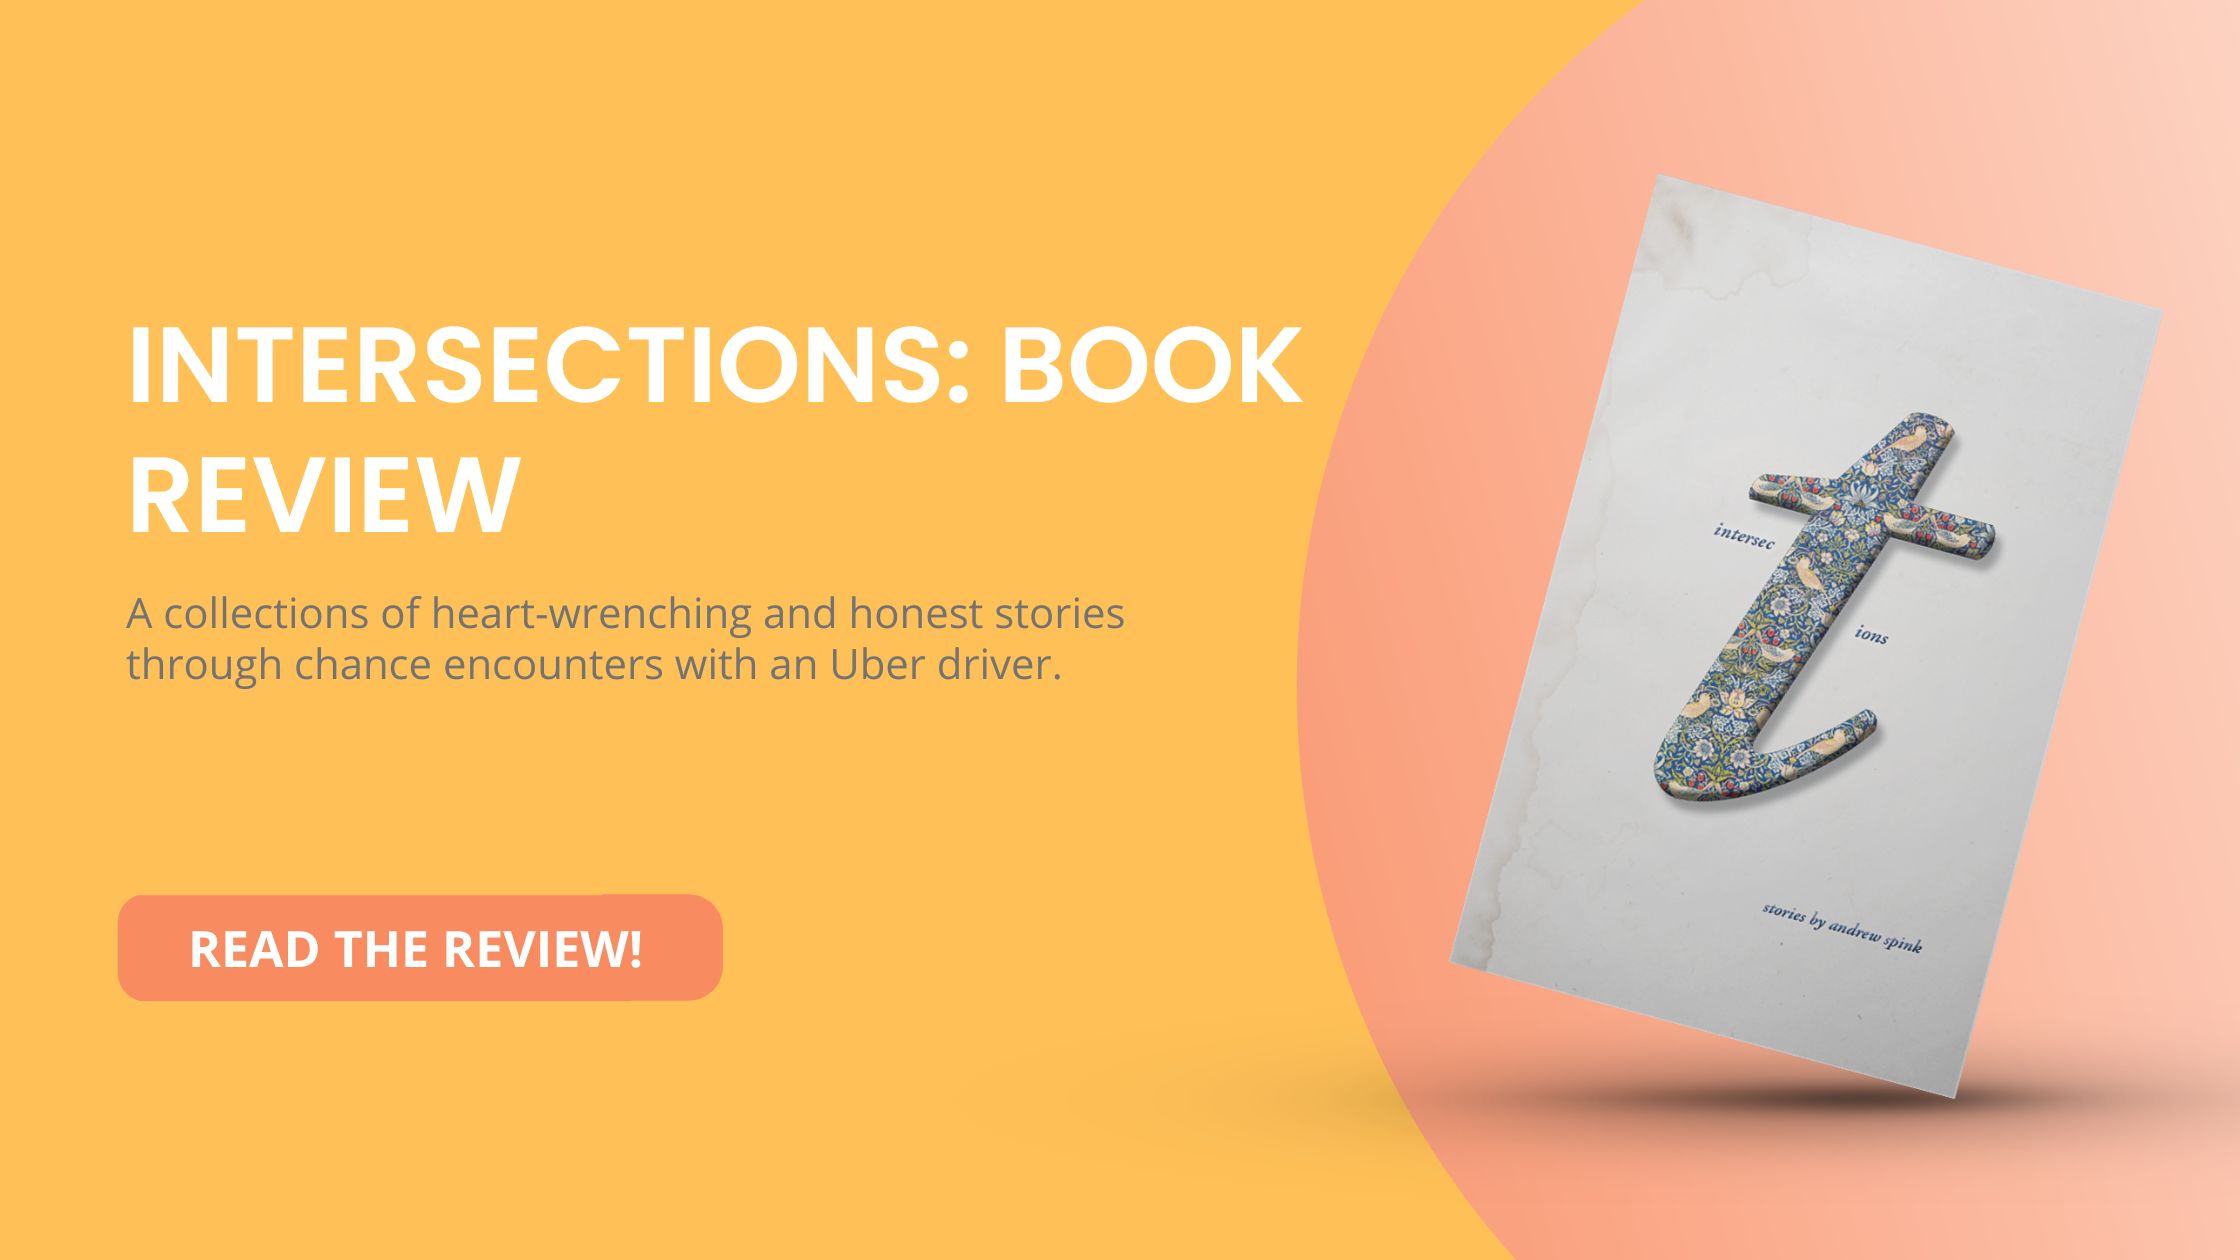 Intersections by Andrew Spink: Book Review